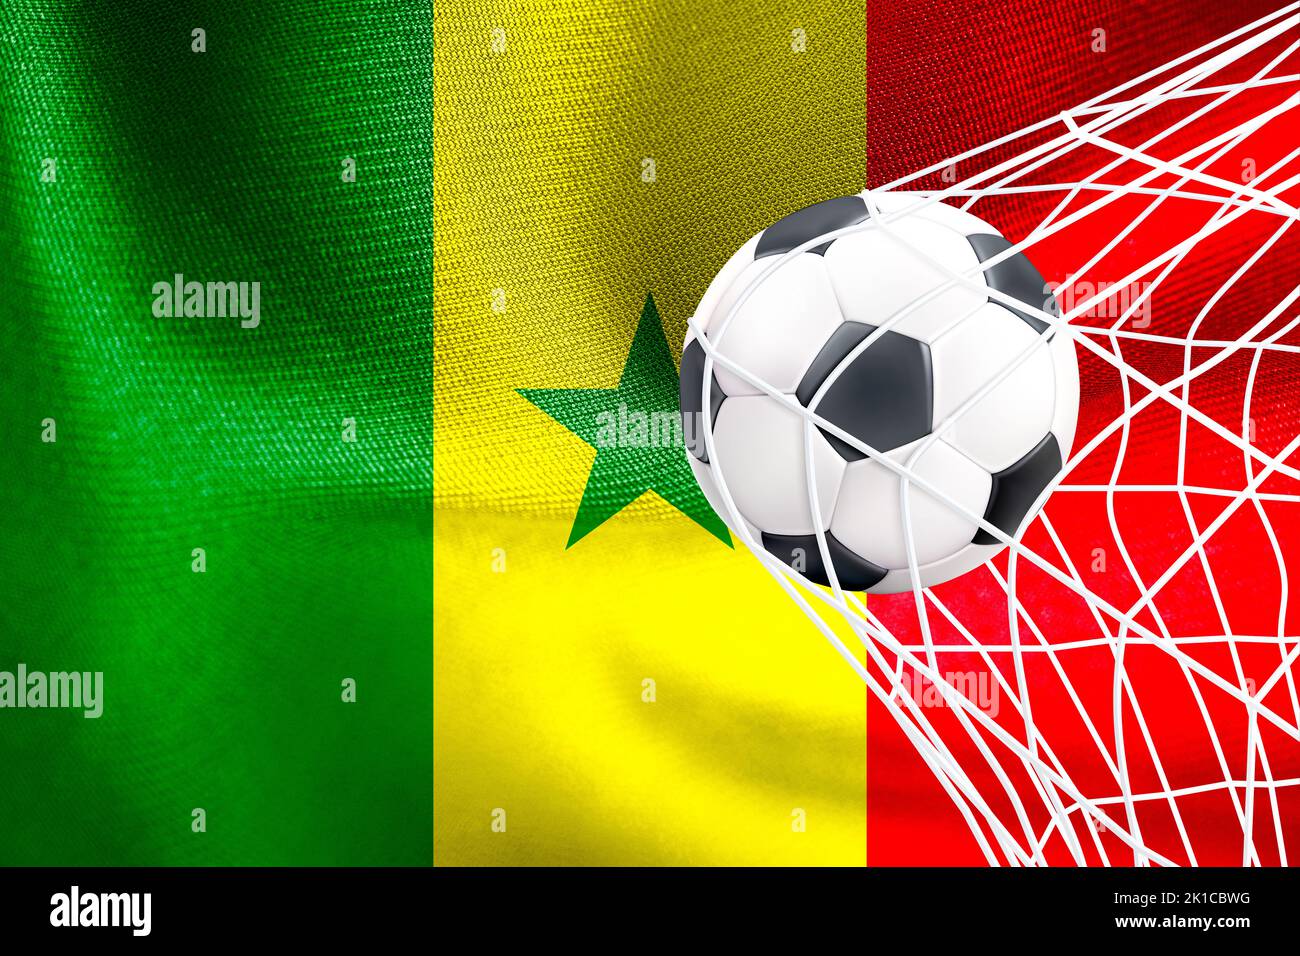 FIFA World Cup 2022, Senegal National flag with a soccer ball in net, Qatar 2022 Wallpaper, 3D work and 3D image. Yerevan, Armenia - 2022 September 16 Stock Photo